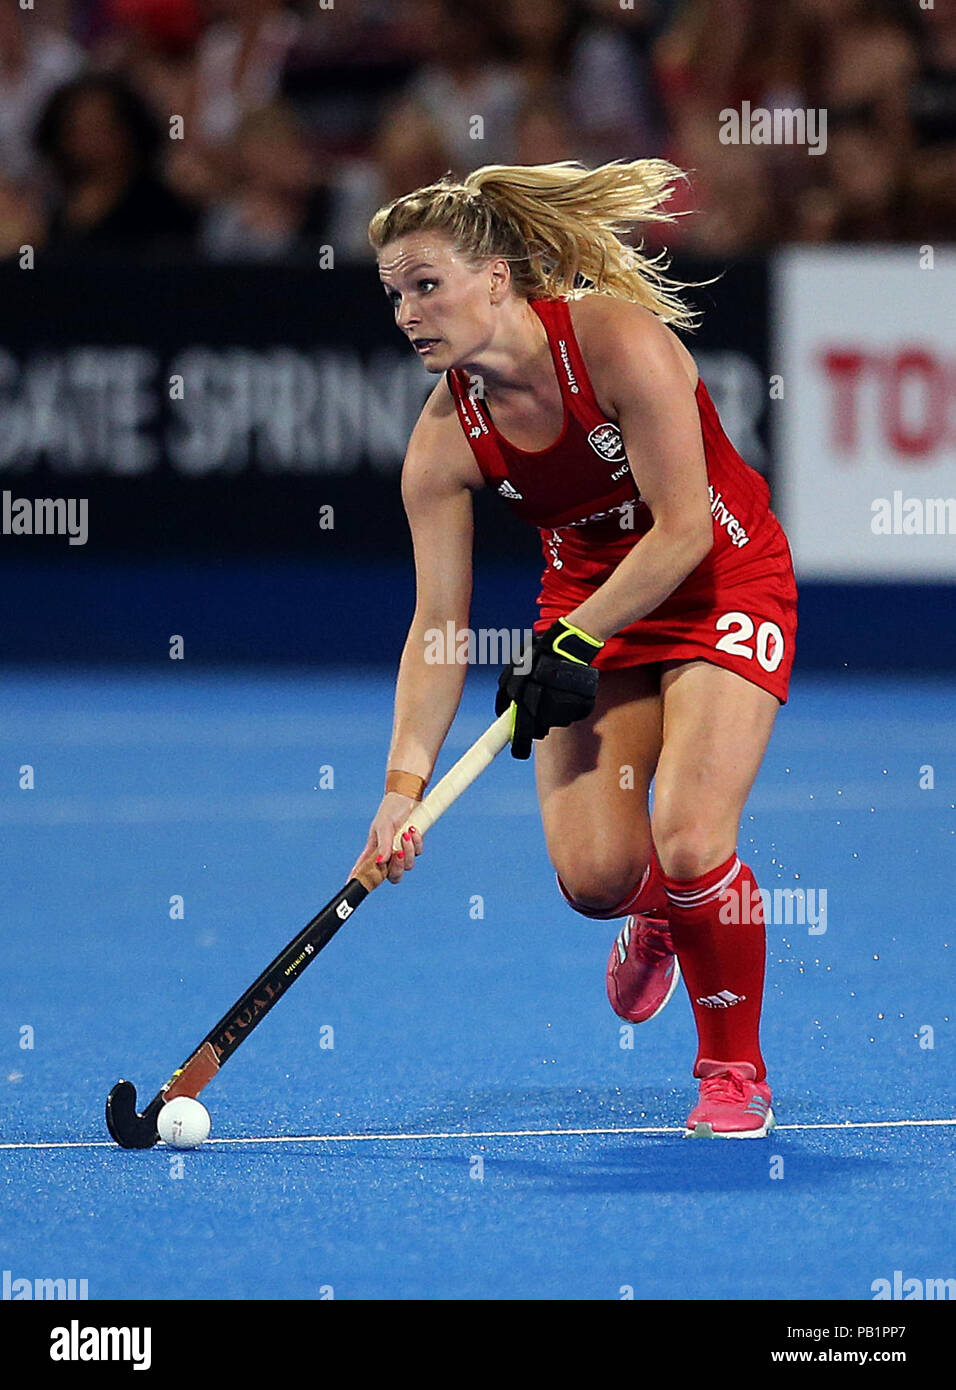 England's Hollie Pearne-Webb in action during the national Vitality Women's Hockey World Cup match at The Lee Valley Hockey and tennis Centre, London. PRESS ASSOCIATION Photo, Picture date: Wednesday July 25, 2018. Photo credit should read: Steven Paston/PA Wire. Stock Photo